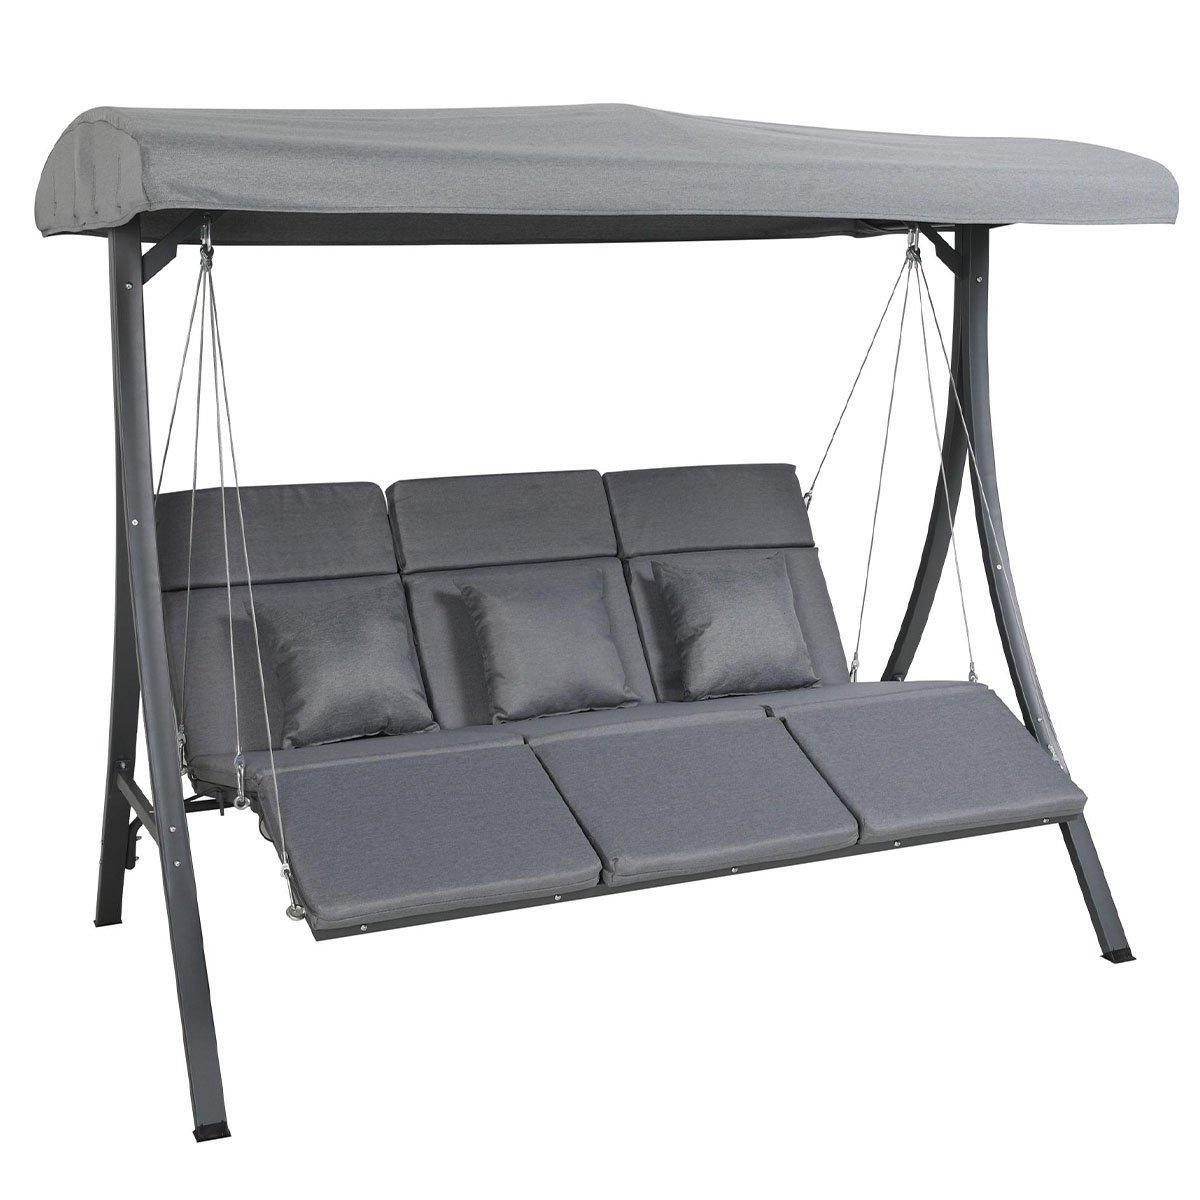 3 Seater Lounger Swing Chair for Garden or Patio - Grey - image 1